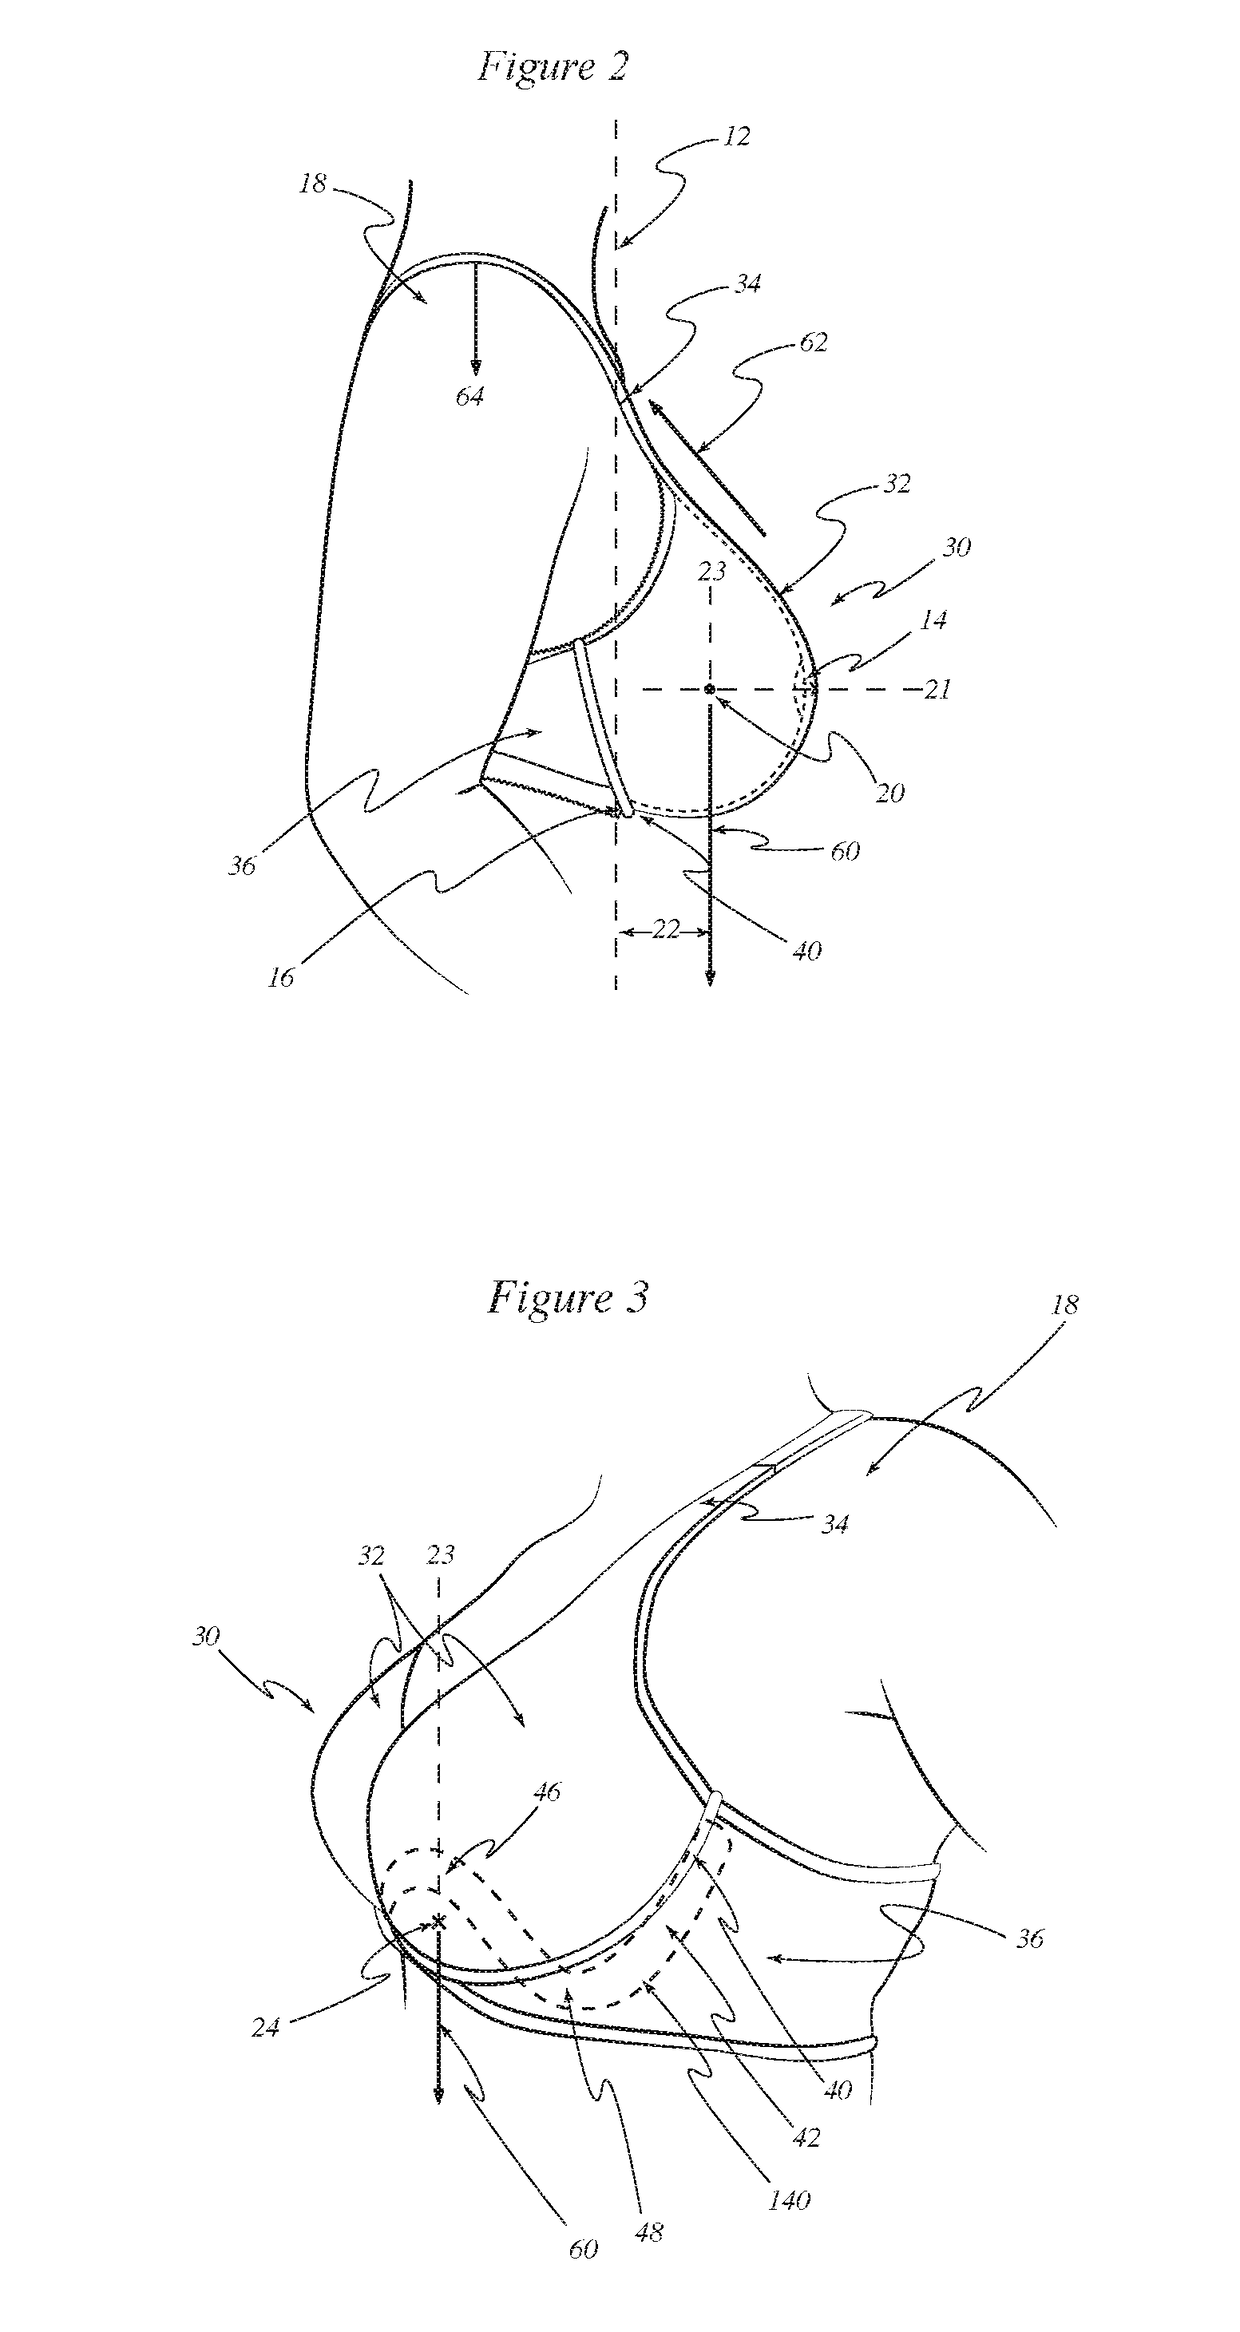 Support garment with cantilevered sinusoidal support form